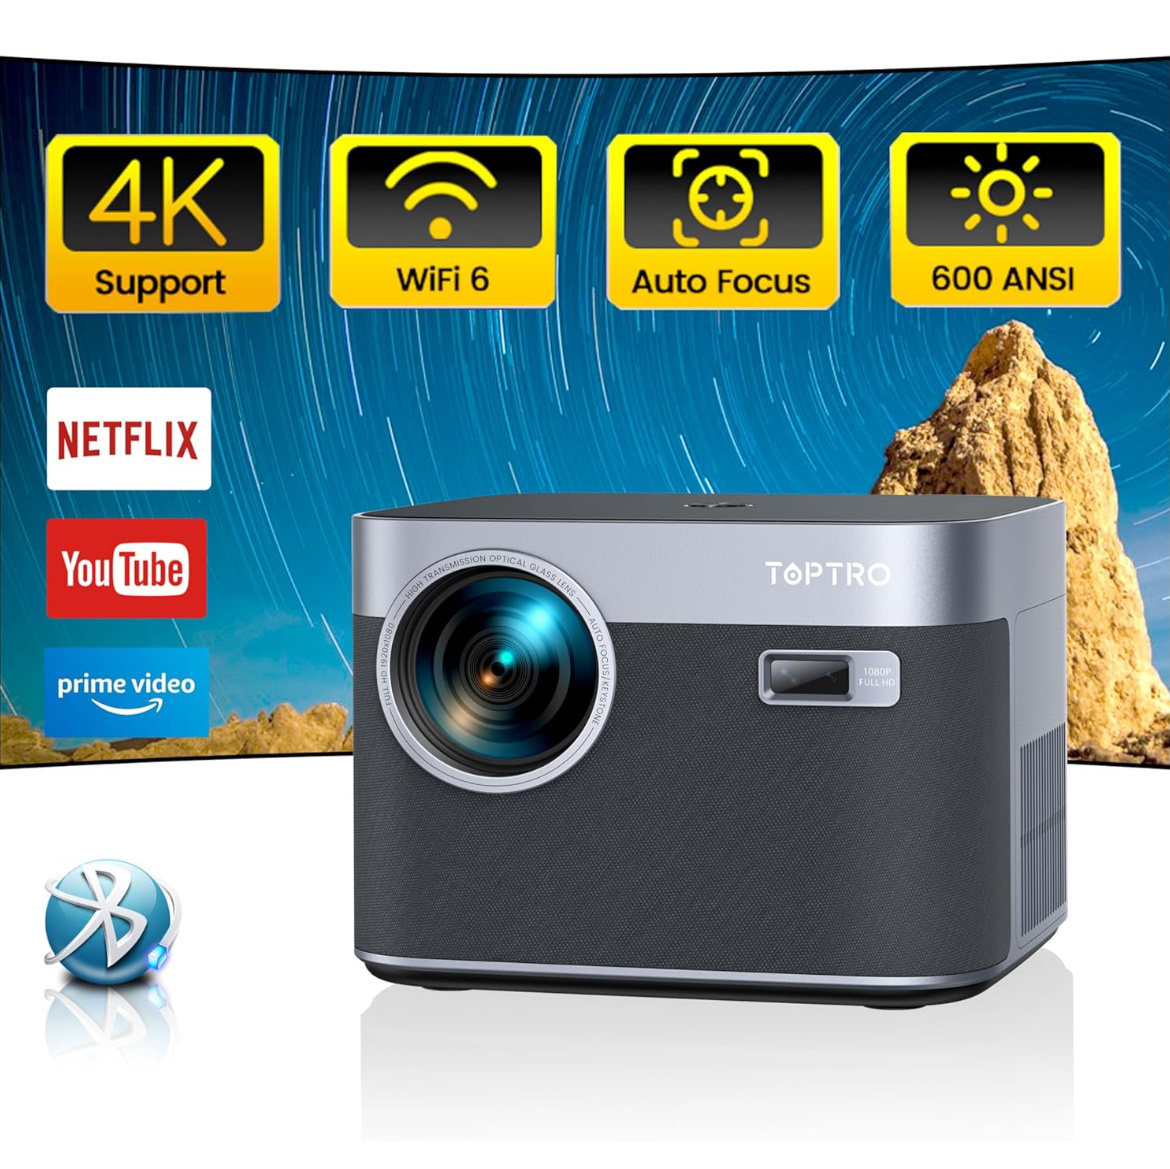 Projectors TOPTRO TR22 Outdoor Projector 4K Supported Native 1080P Full HD  480 ANSI 5G WiFi Bluetooth Projector 4D/4P Keystone Correction Q231128 From  Ethereall, $101.61